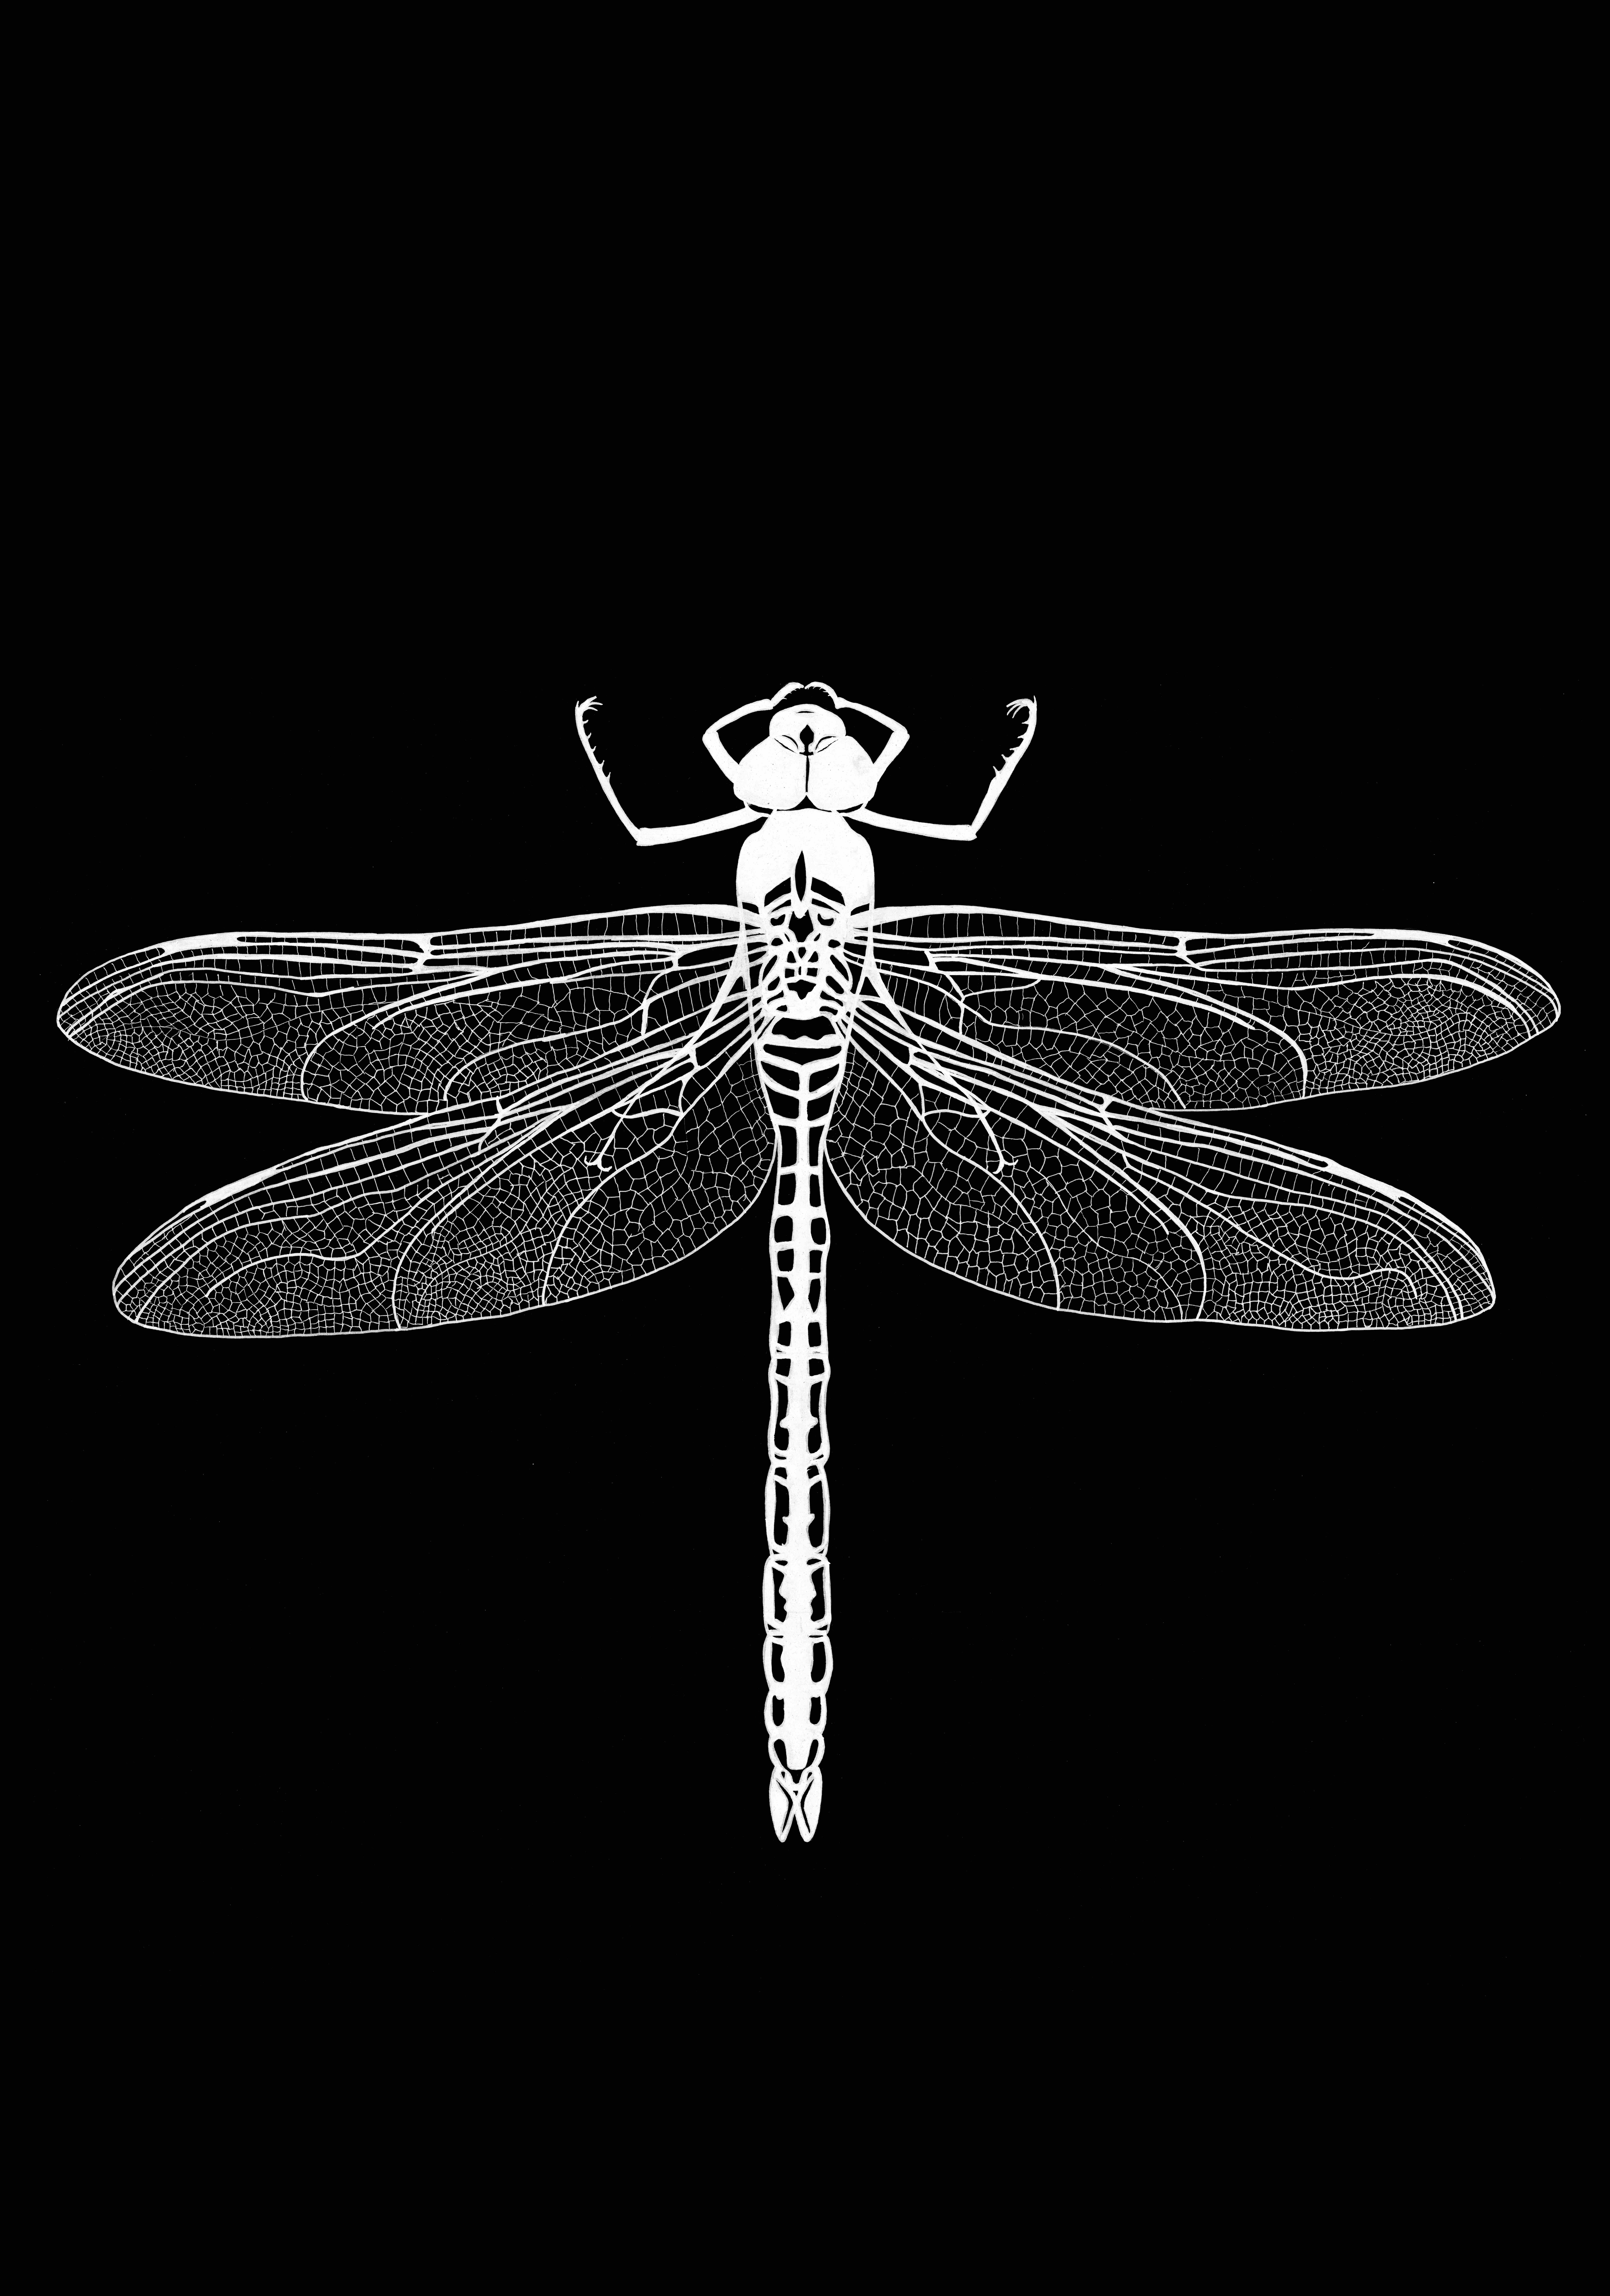 Dragonfly 2 Inverted | Ink Drawing by Debbie New